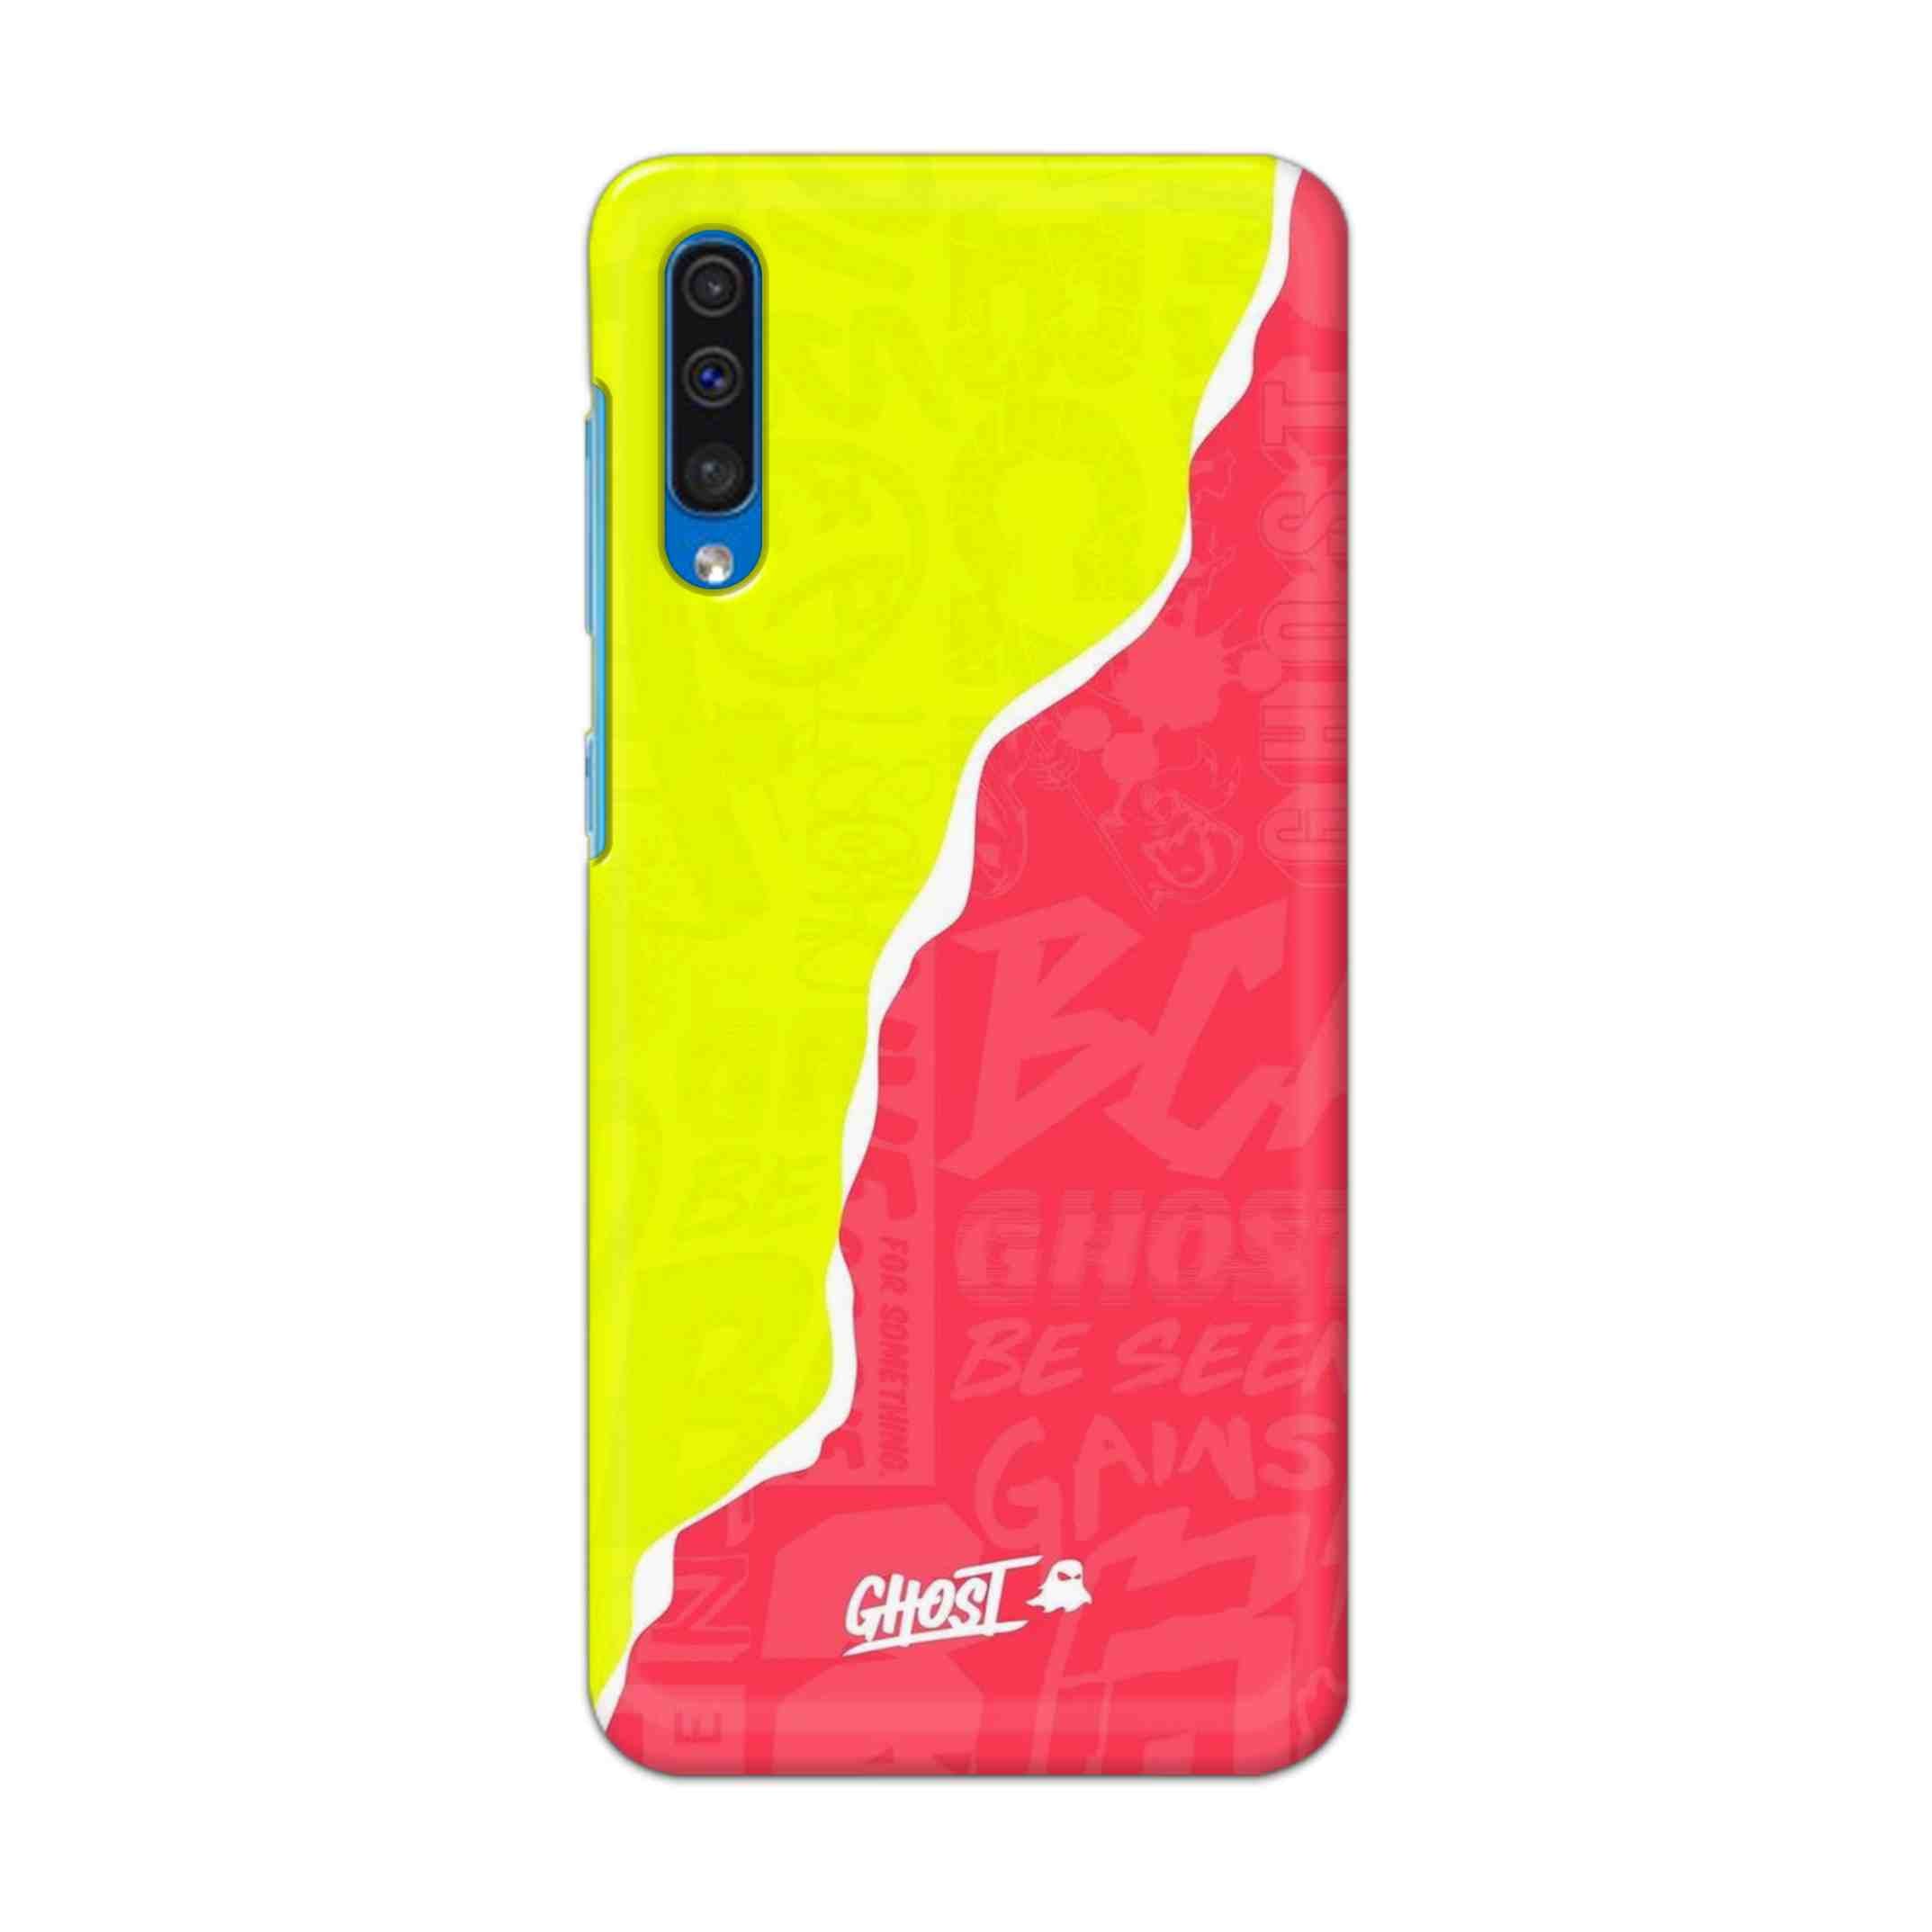 Buy Ghost Hard Back Mobile Phone Case Cover For Samsung Galaxy A50 / A50s / A30s Online